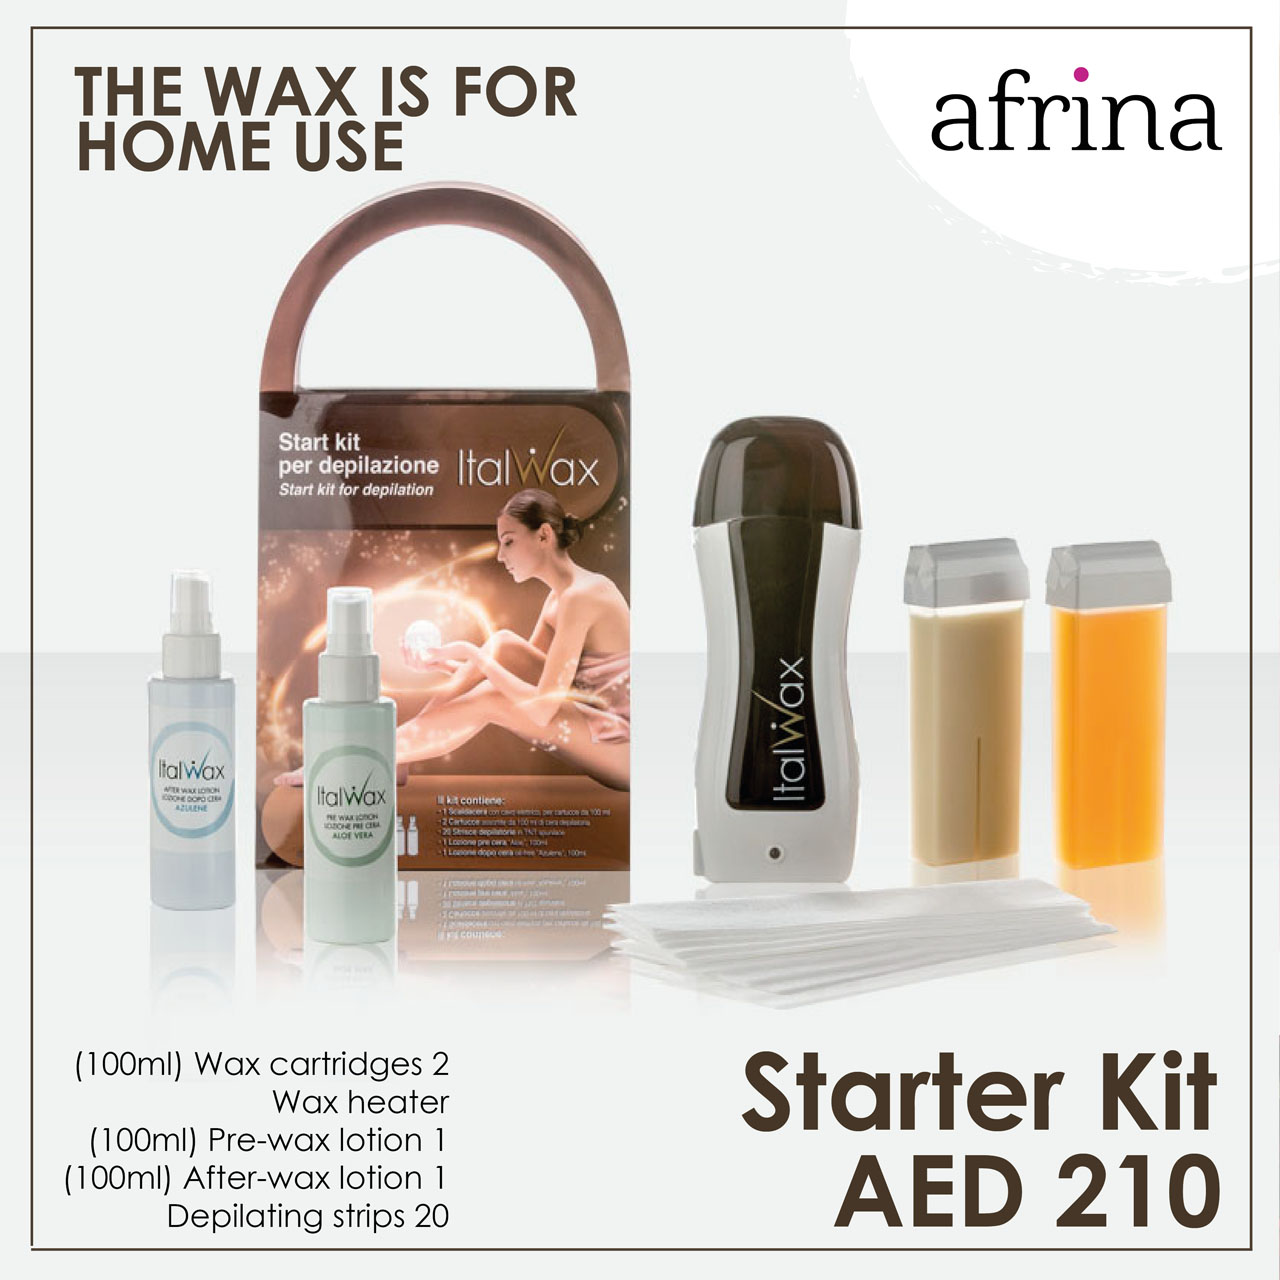 Amazing starter kit of self hair waxing for this quarantine